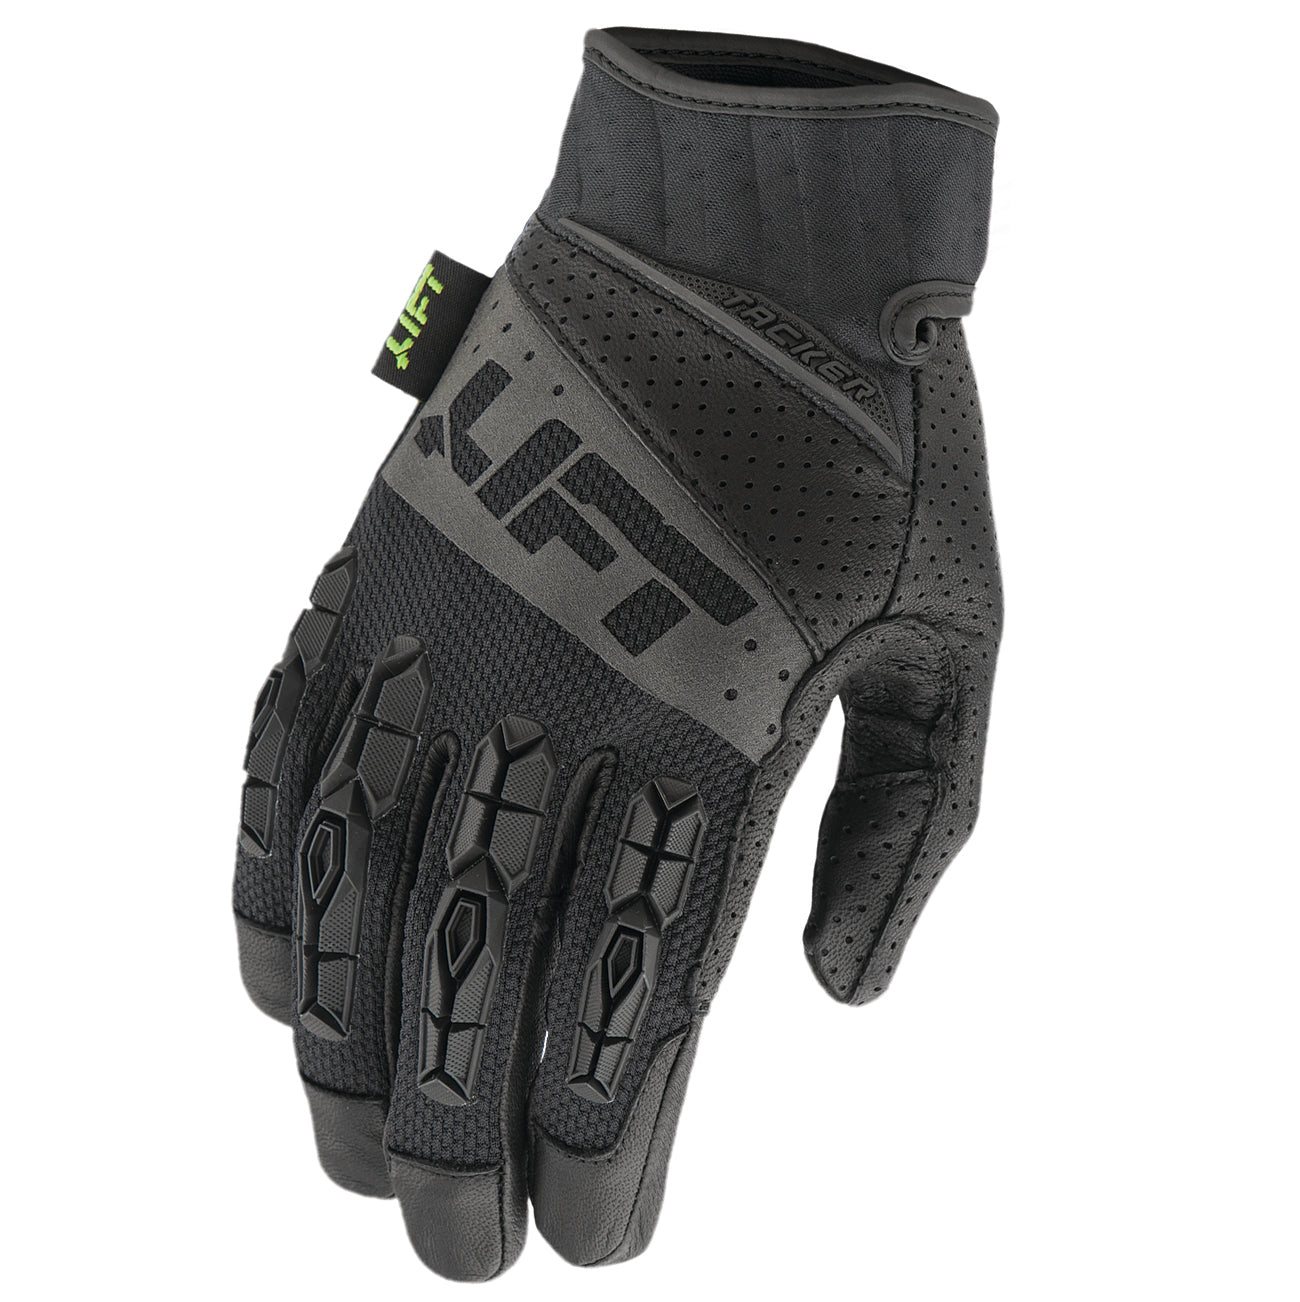 LIFT Safety - TACKER Winter Glove (Black) with Thinsulate